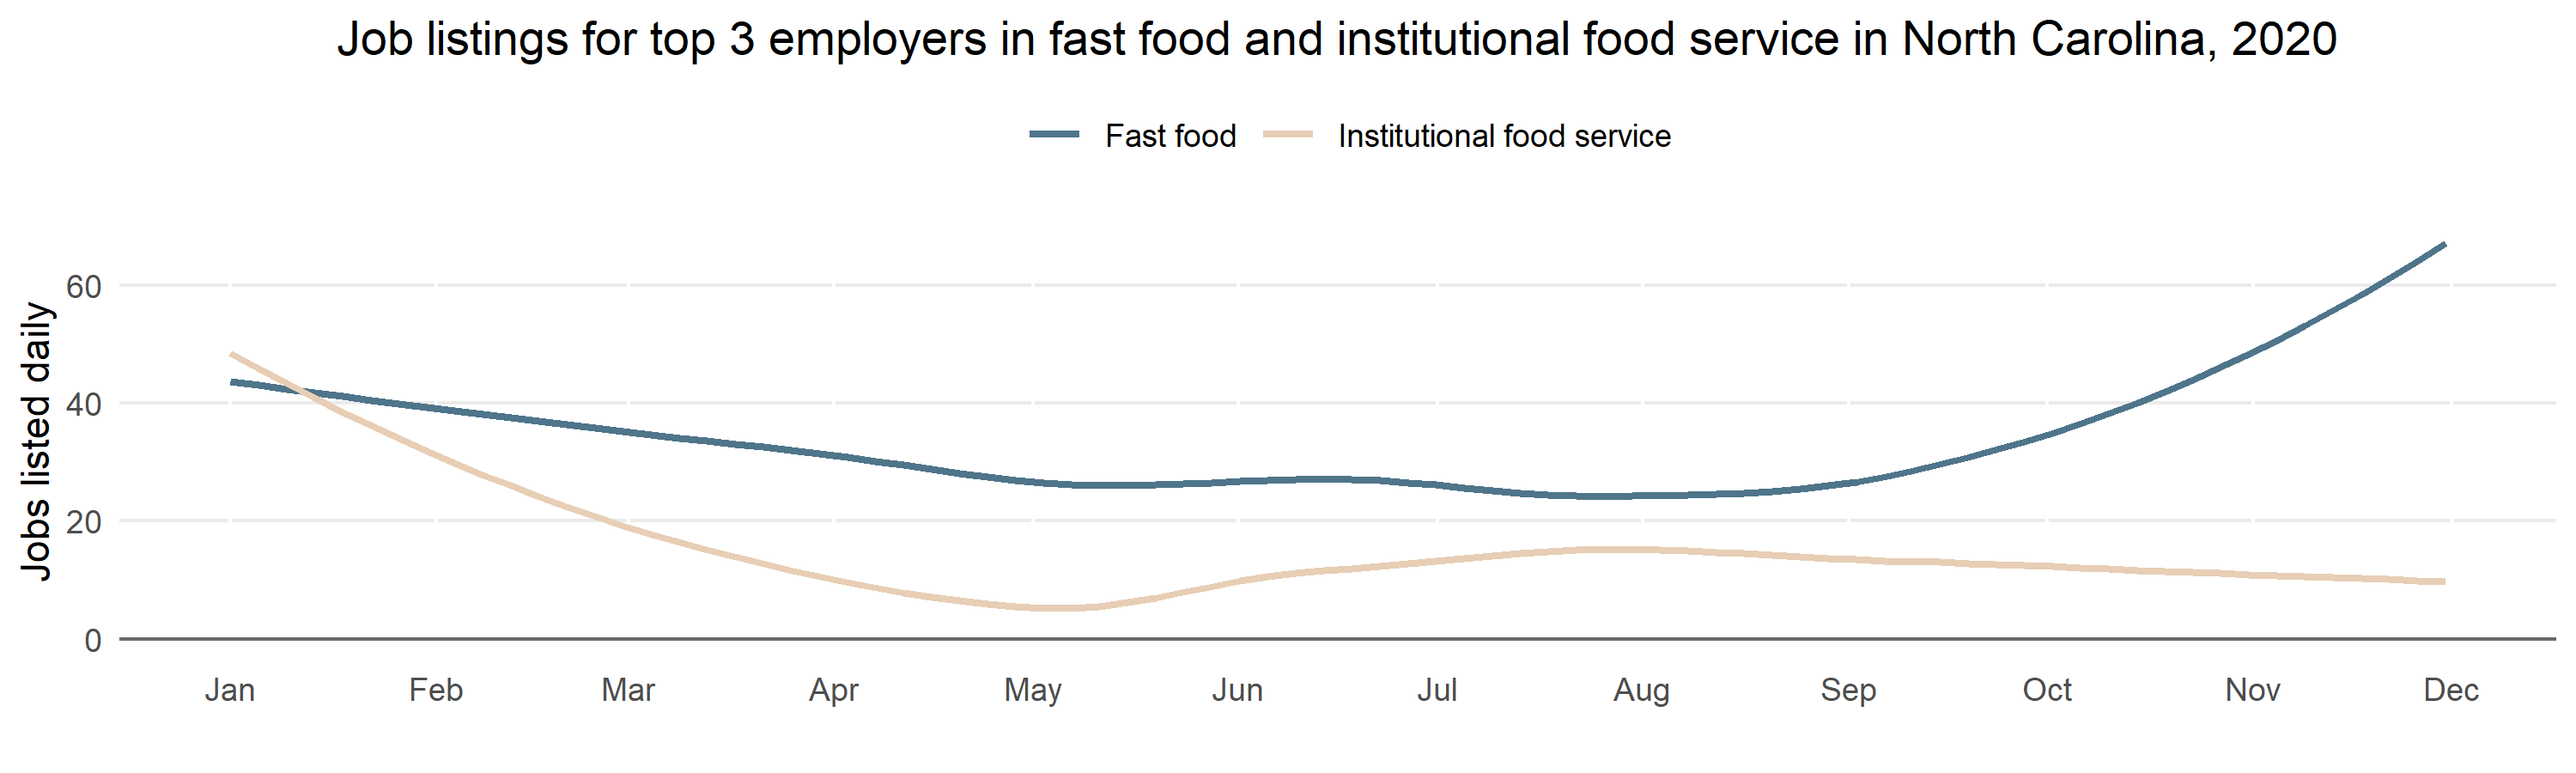 A two-line line chart titled “Job listings for top 3 employers in fast food and institutional food service.”  The lines represent fast food job postings and institutional food service job postings.  The y-axis represents total daily jobs, ranging from 0 to 60, and the x-axis represents the date, ranging from January 2020 to October 2020.  The fast food line trends downwards, but begins a drastic rise in October 2020. The institutional food service line crashes steeply in January 2020, and only makes a modest recovery before trending downwards again in August 2020.